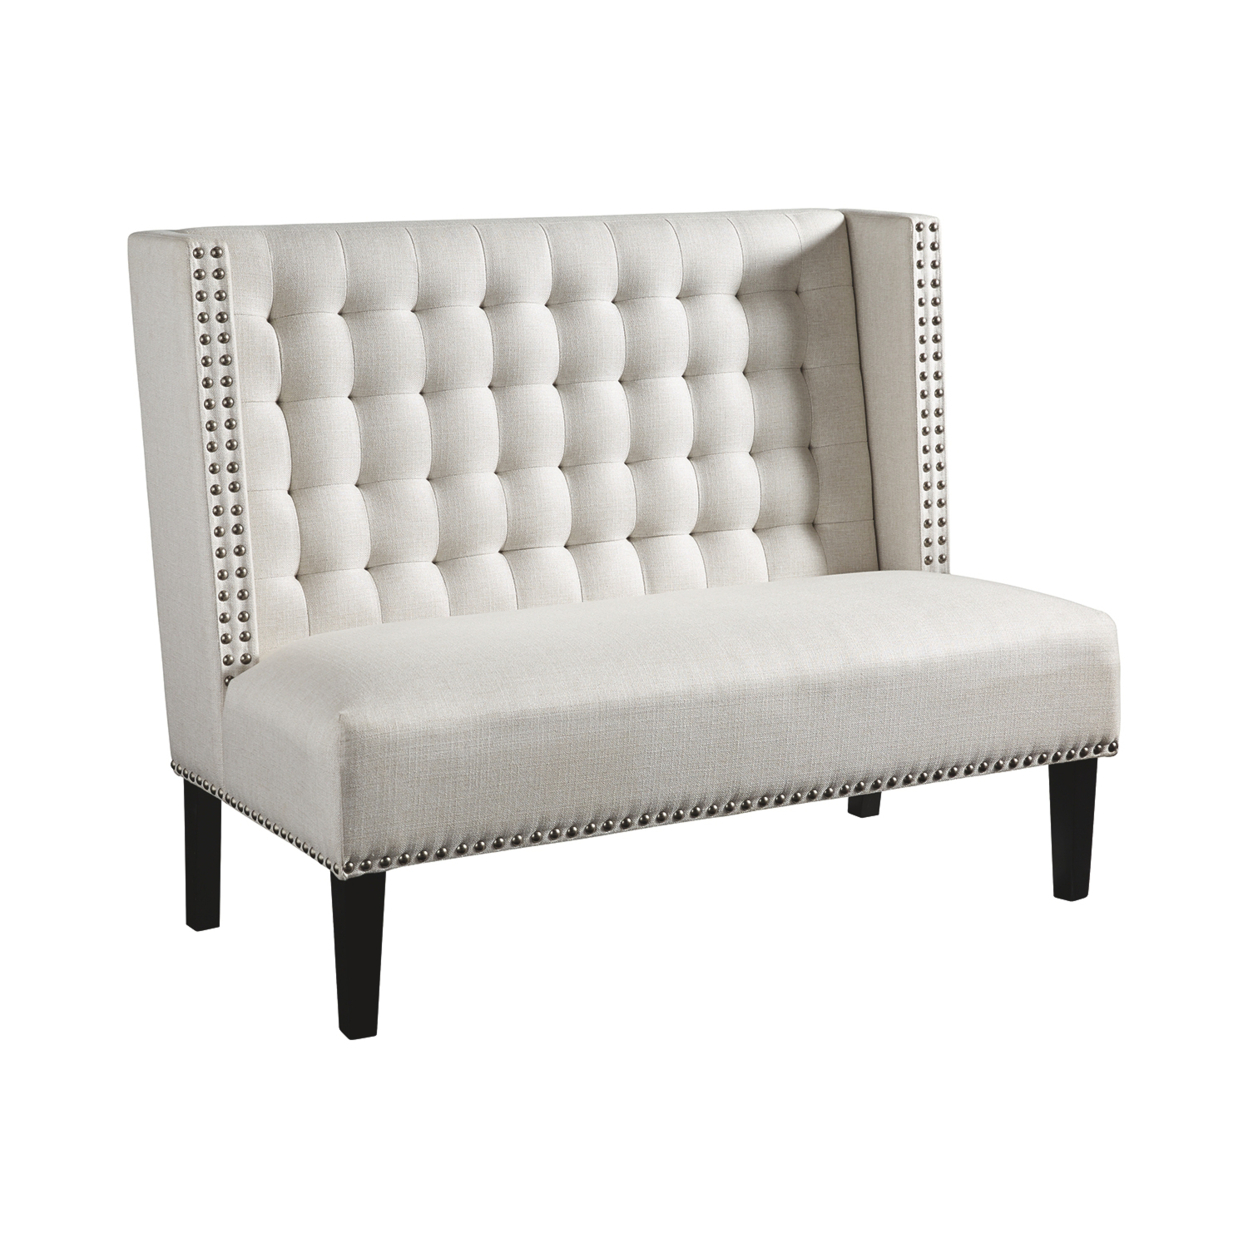 Wood And Fabric Accent Bench With Wing Back Design, Cream- Saltoro Sherpi